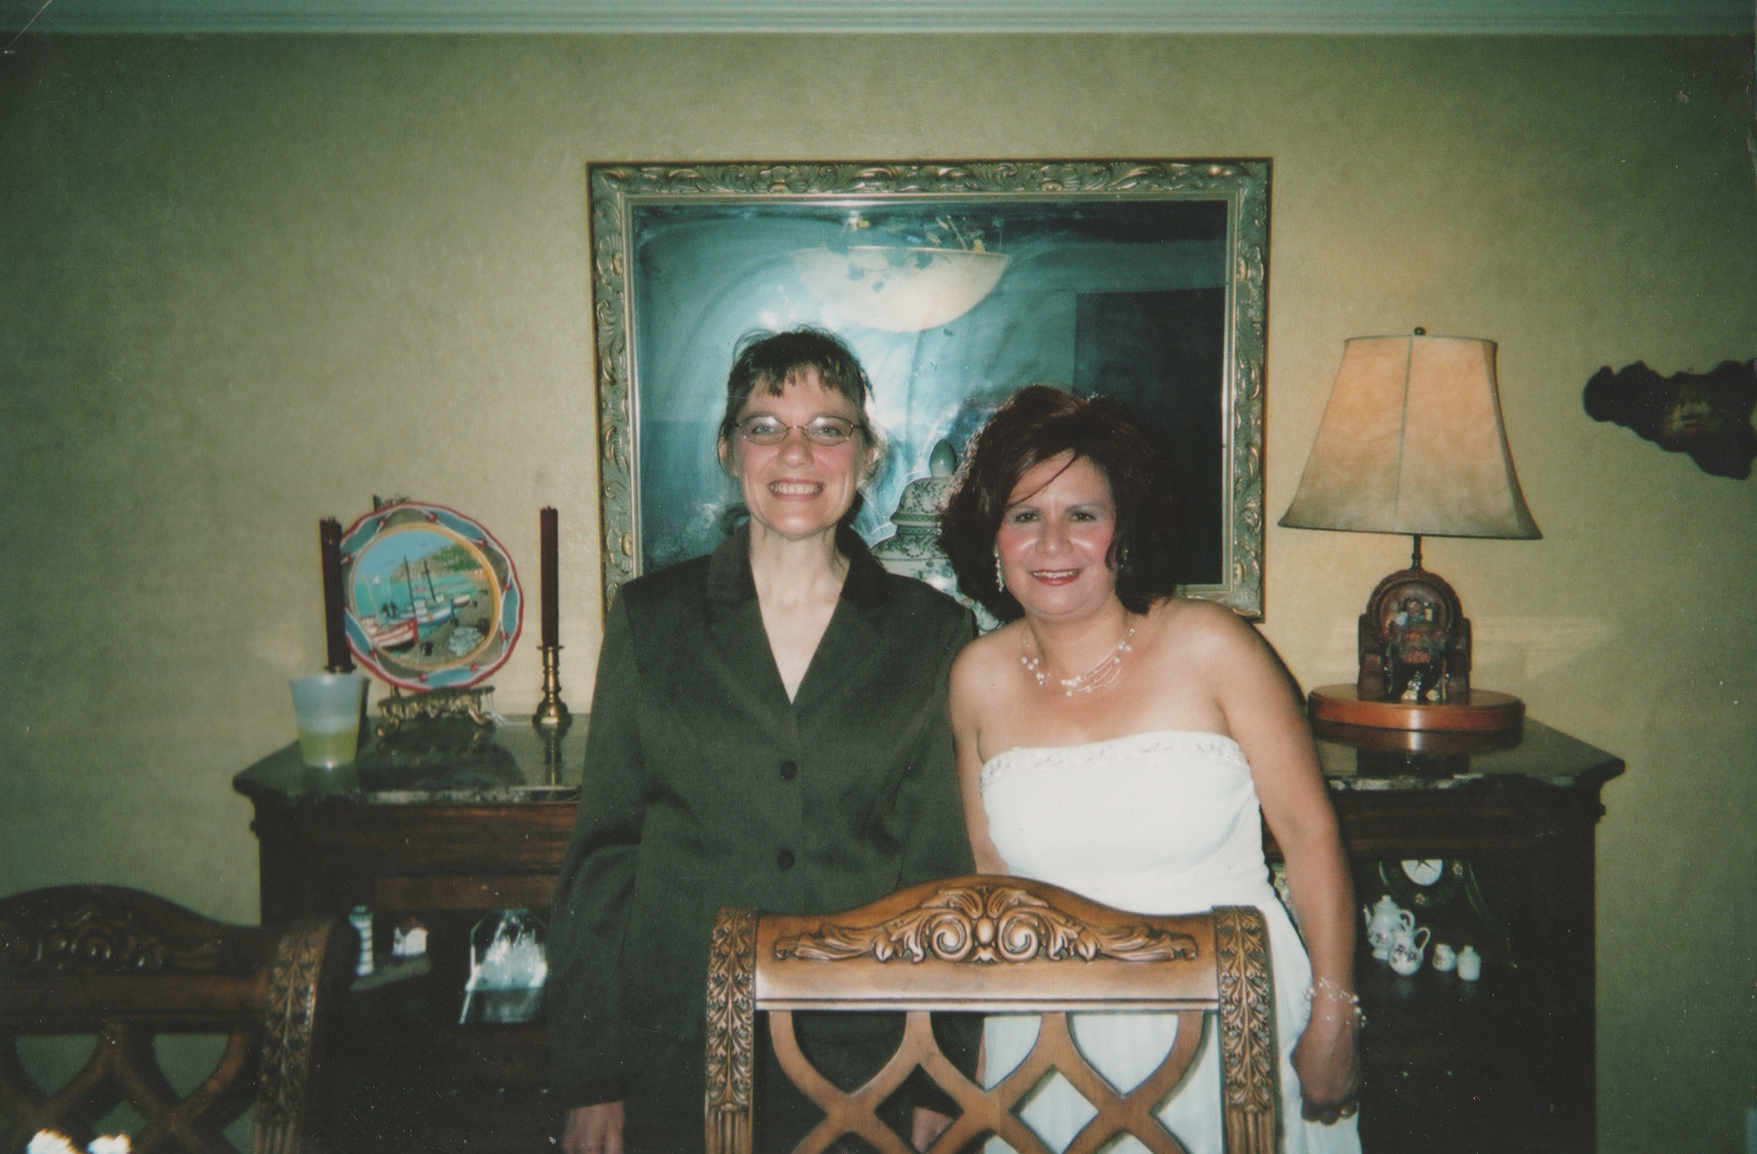 2007-07-06 - Friday - Marilyn Morehead Arnold Mitchell with Maria Arnold, wife of her son, Rick, the wedding of Rick & Maria that day, 1pic.png